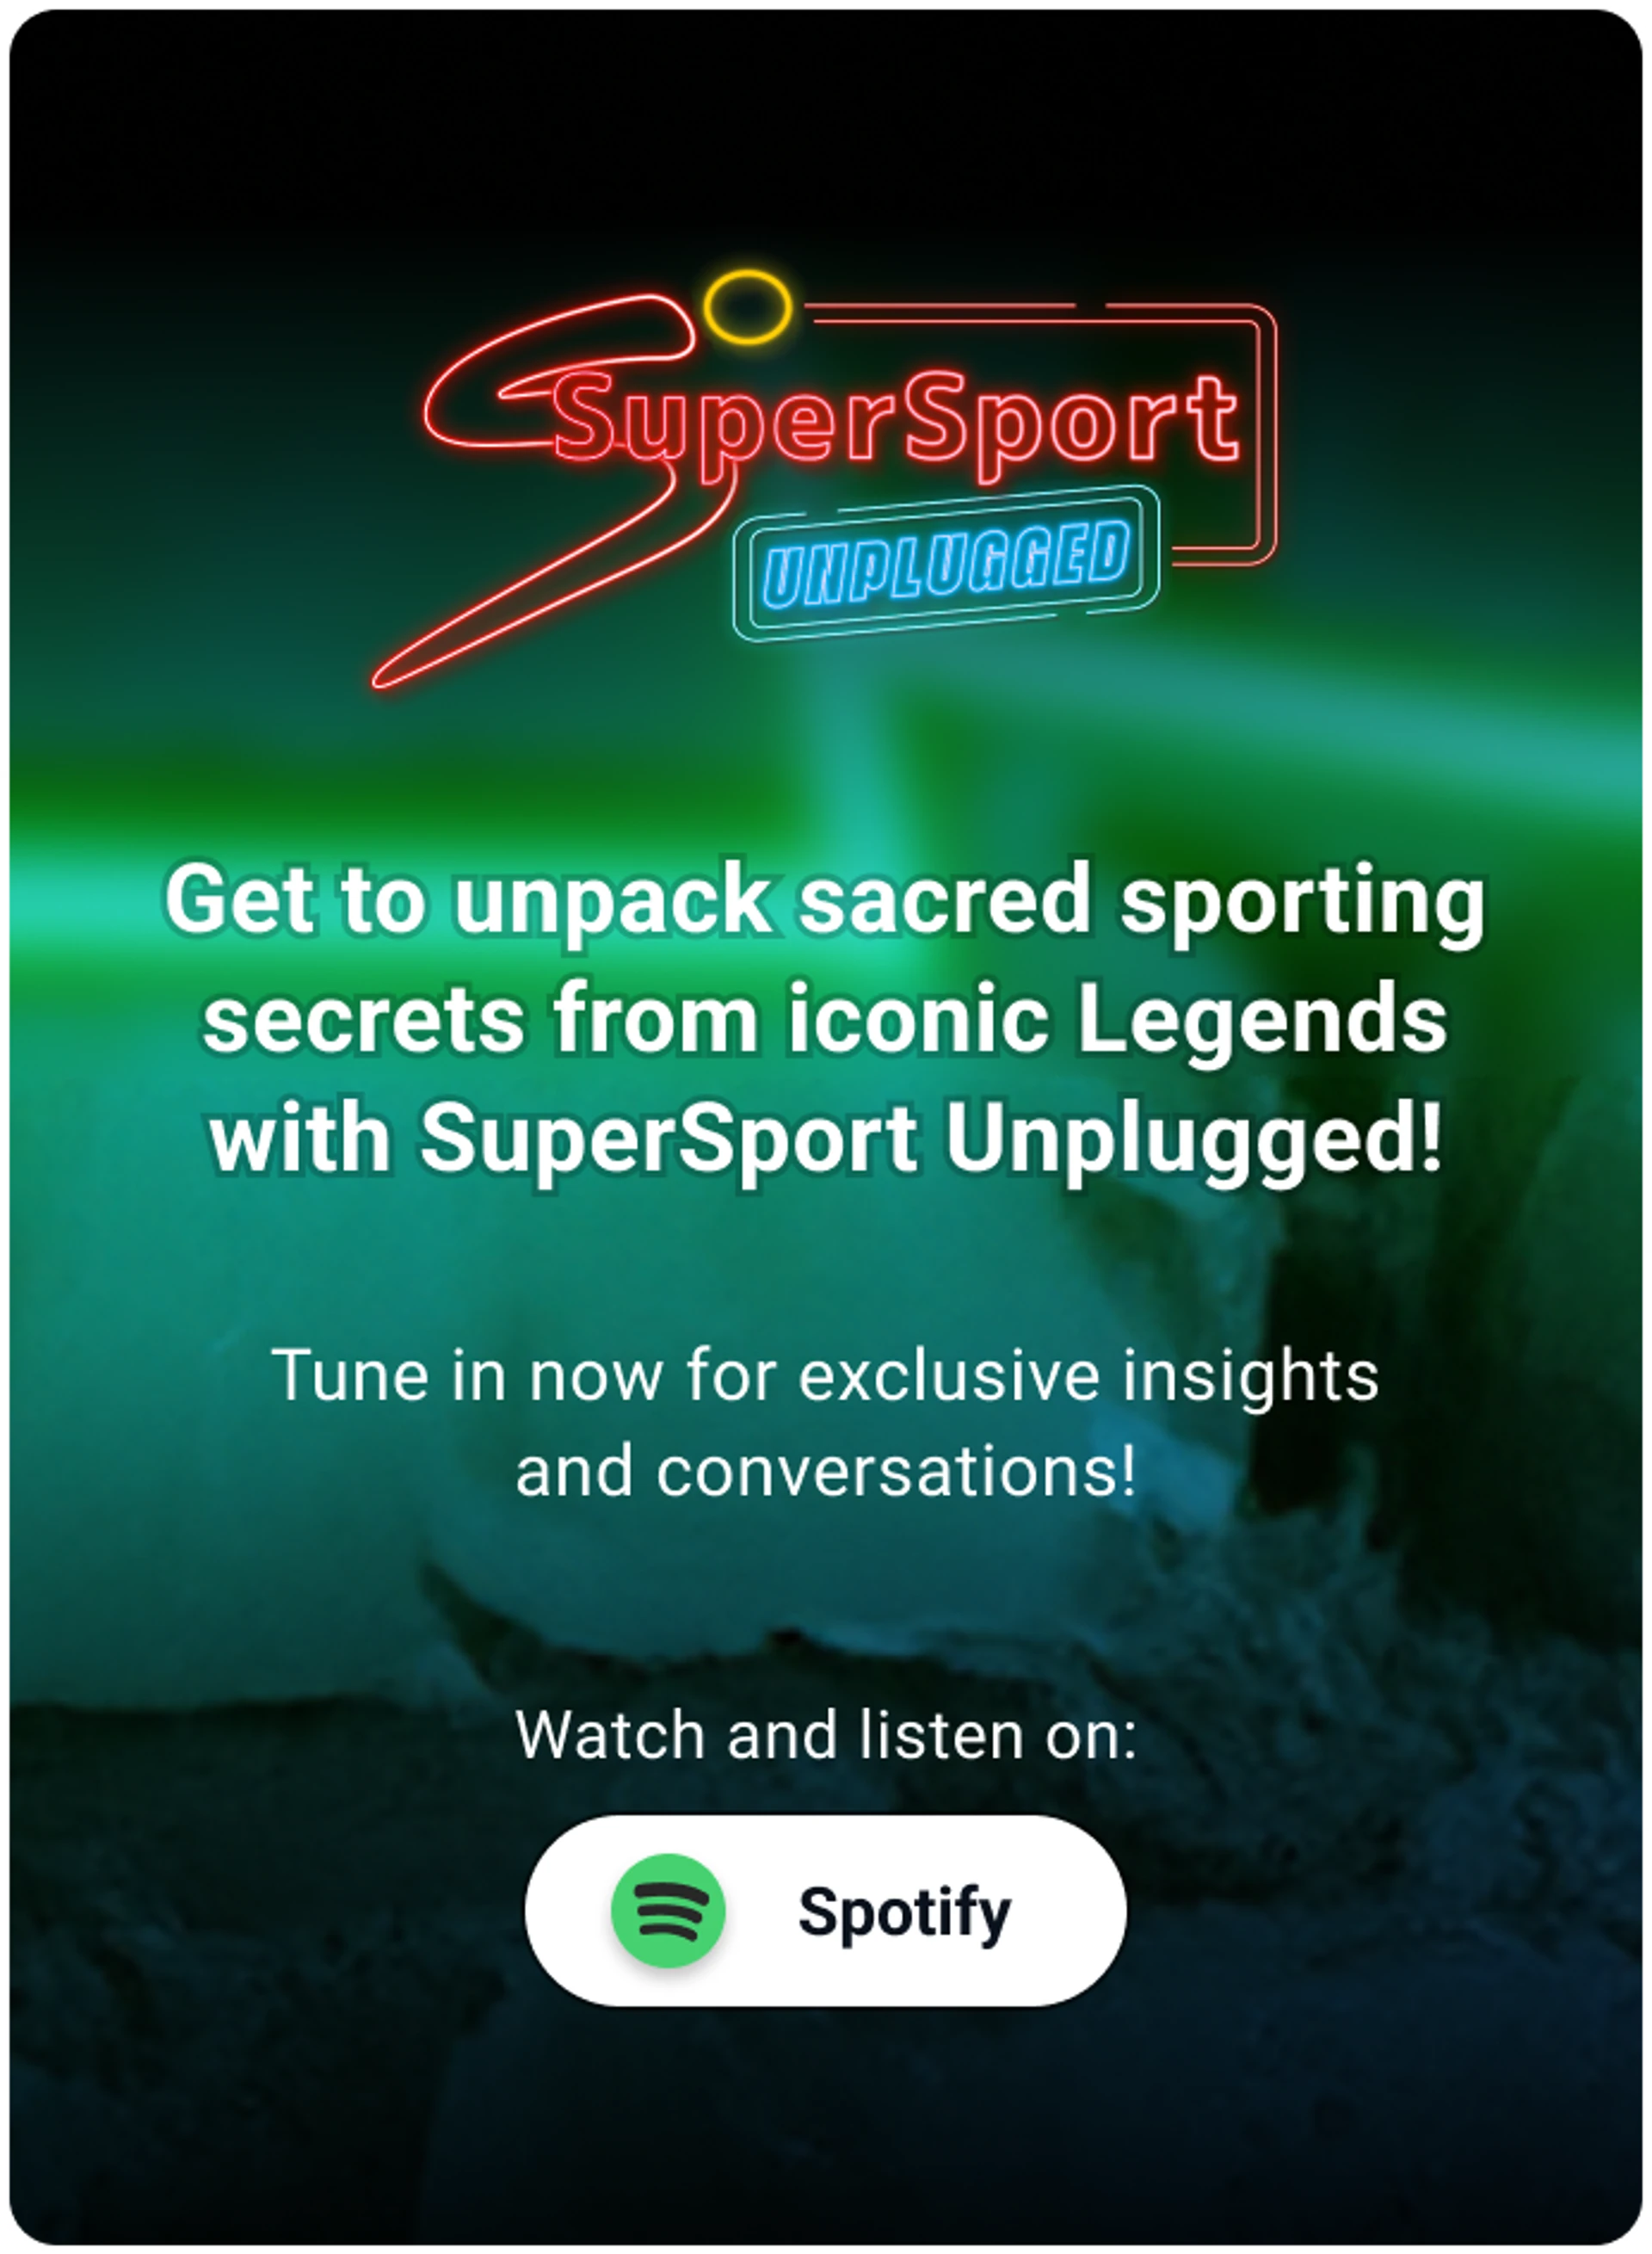 Supersport Unplugged banner inviting the user to watch and listen exclusive insights and conversation on Spotify